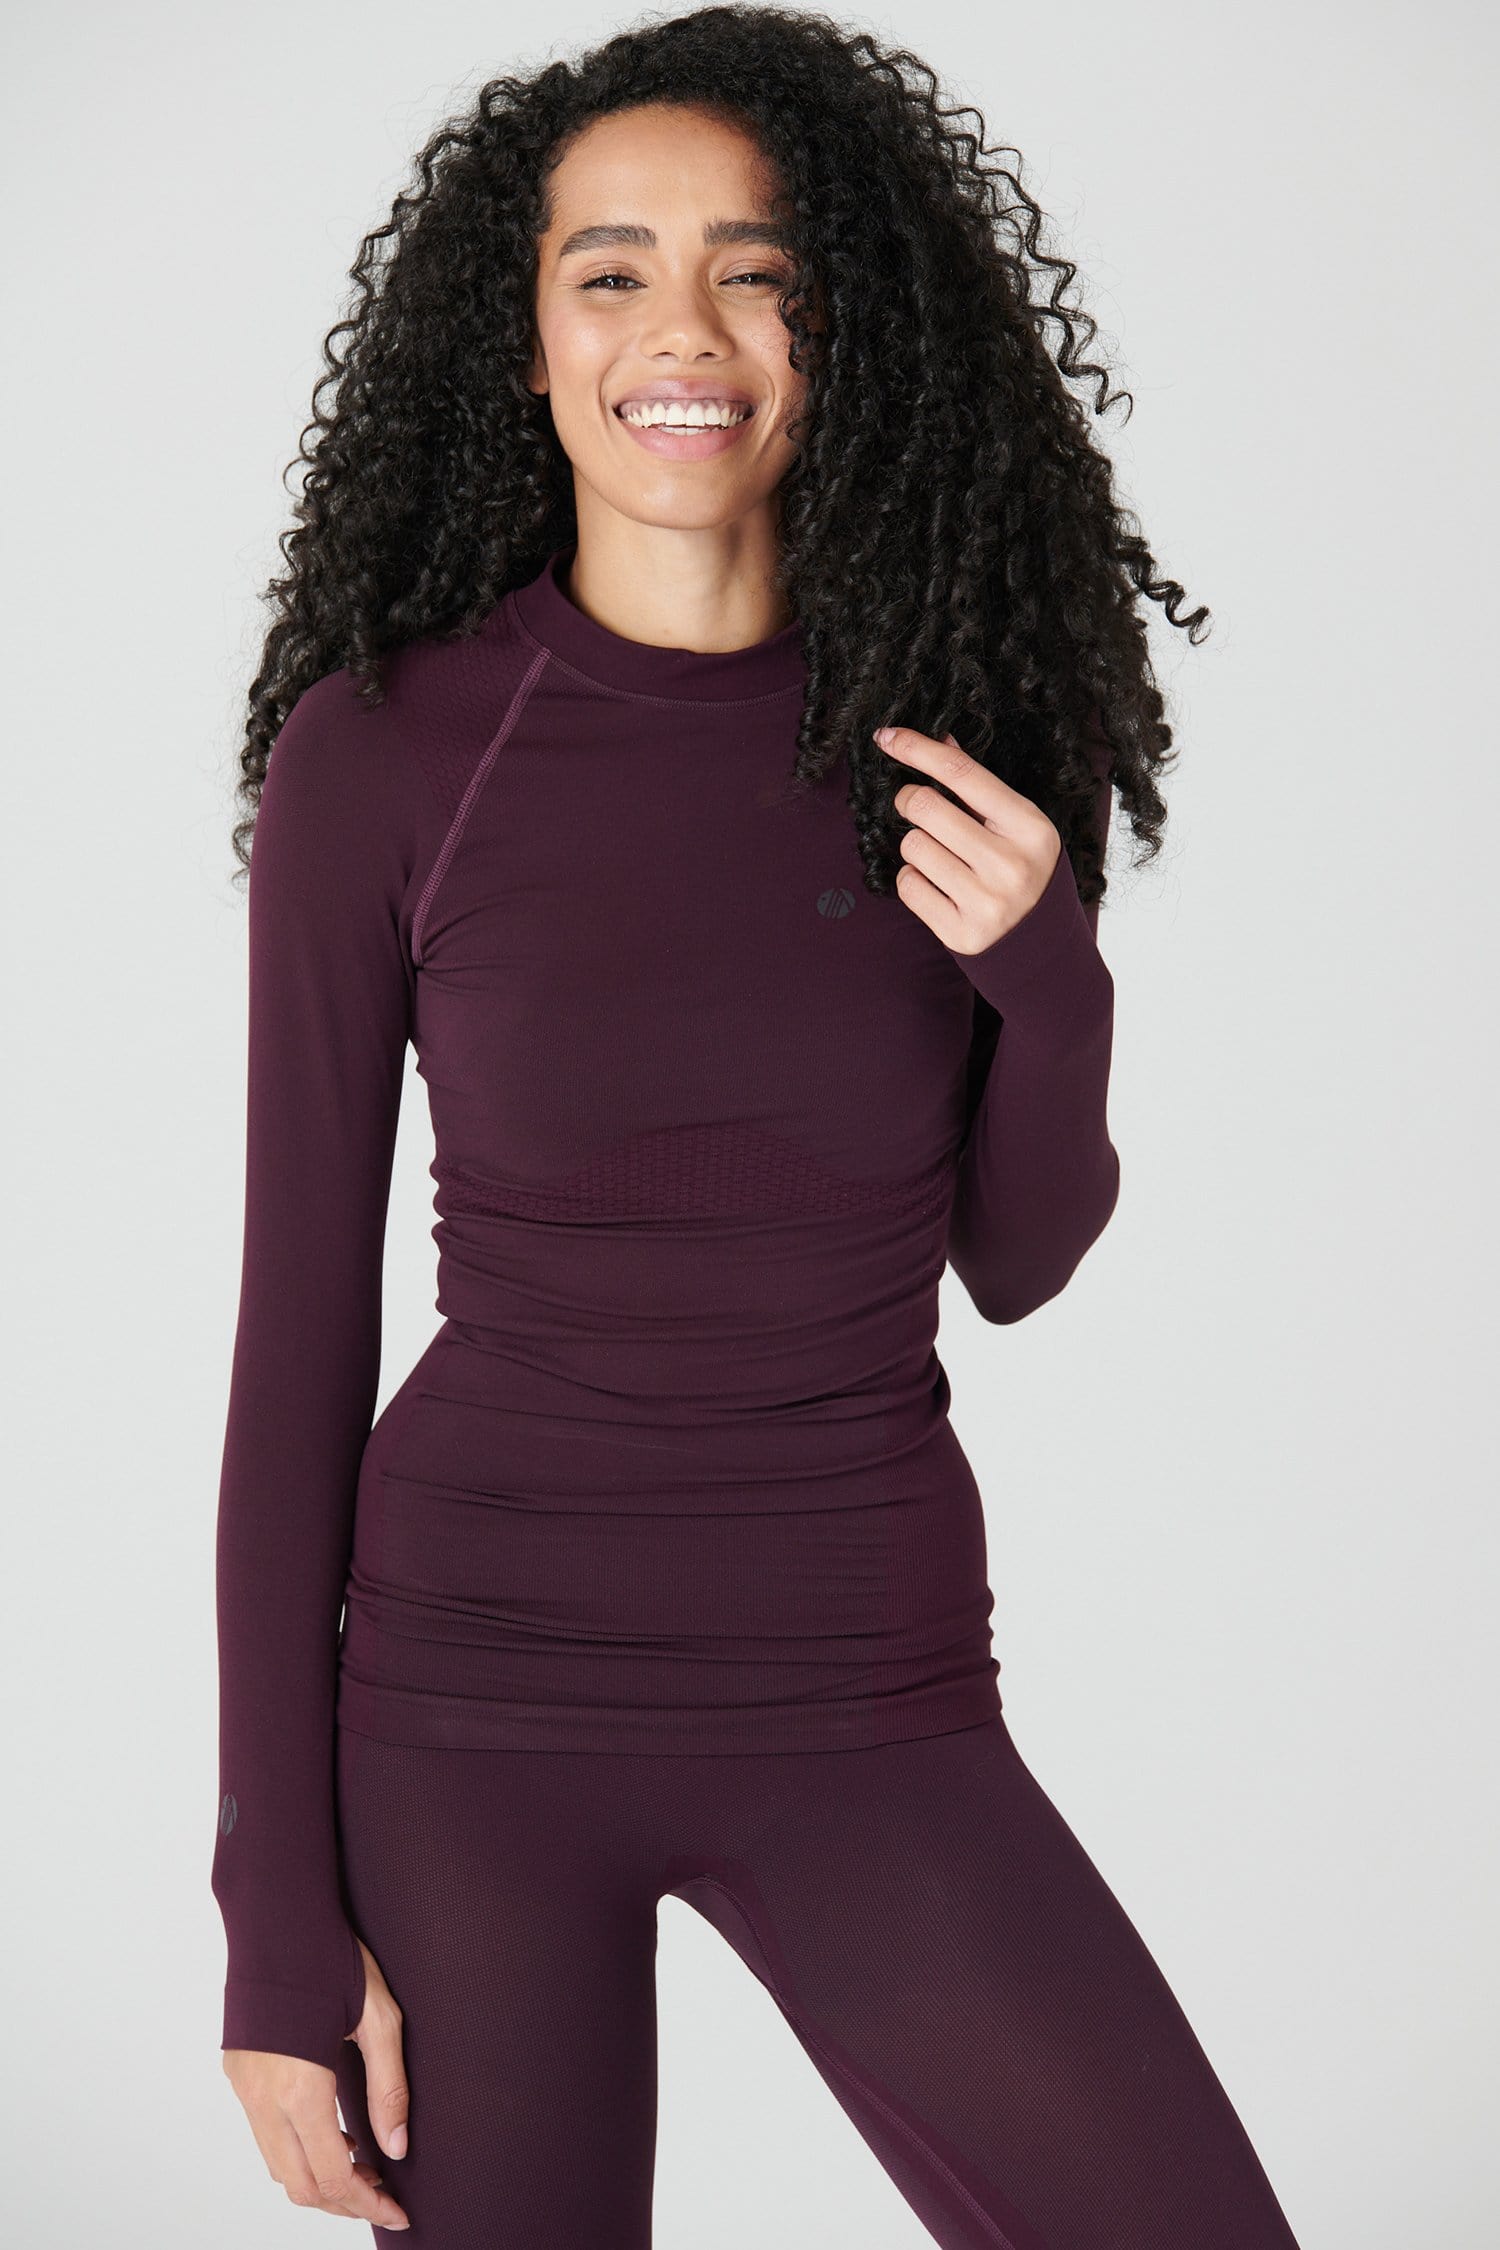 Thermal Seamless Base Layer Top - Aubergine - Xsmall - Small - Womens - Acai Outdoorwear